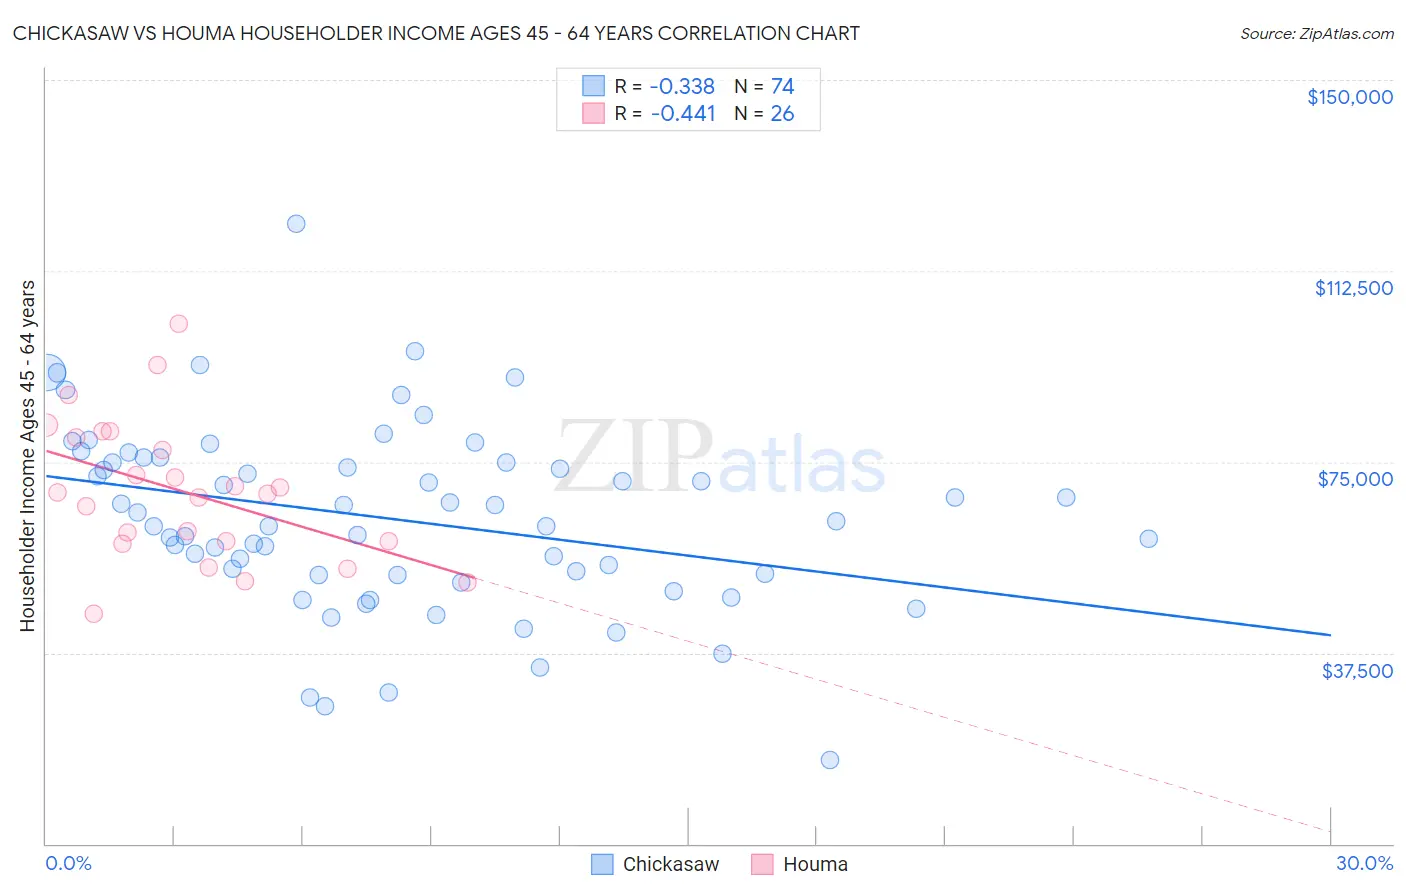 Chickasaw vs Houma Householder Income Ages 45 - 64 years